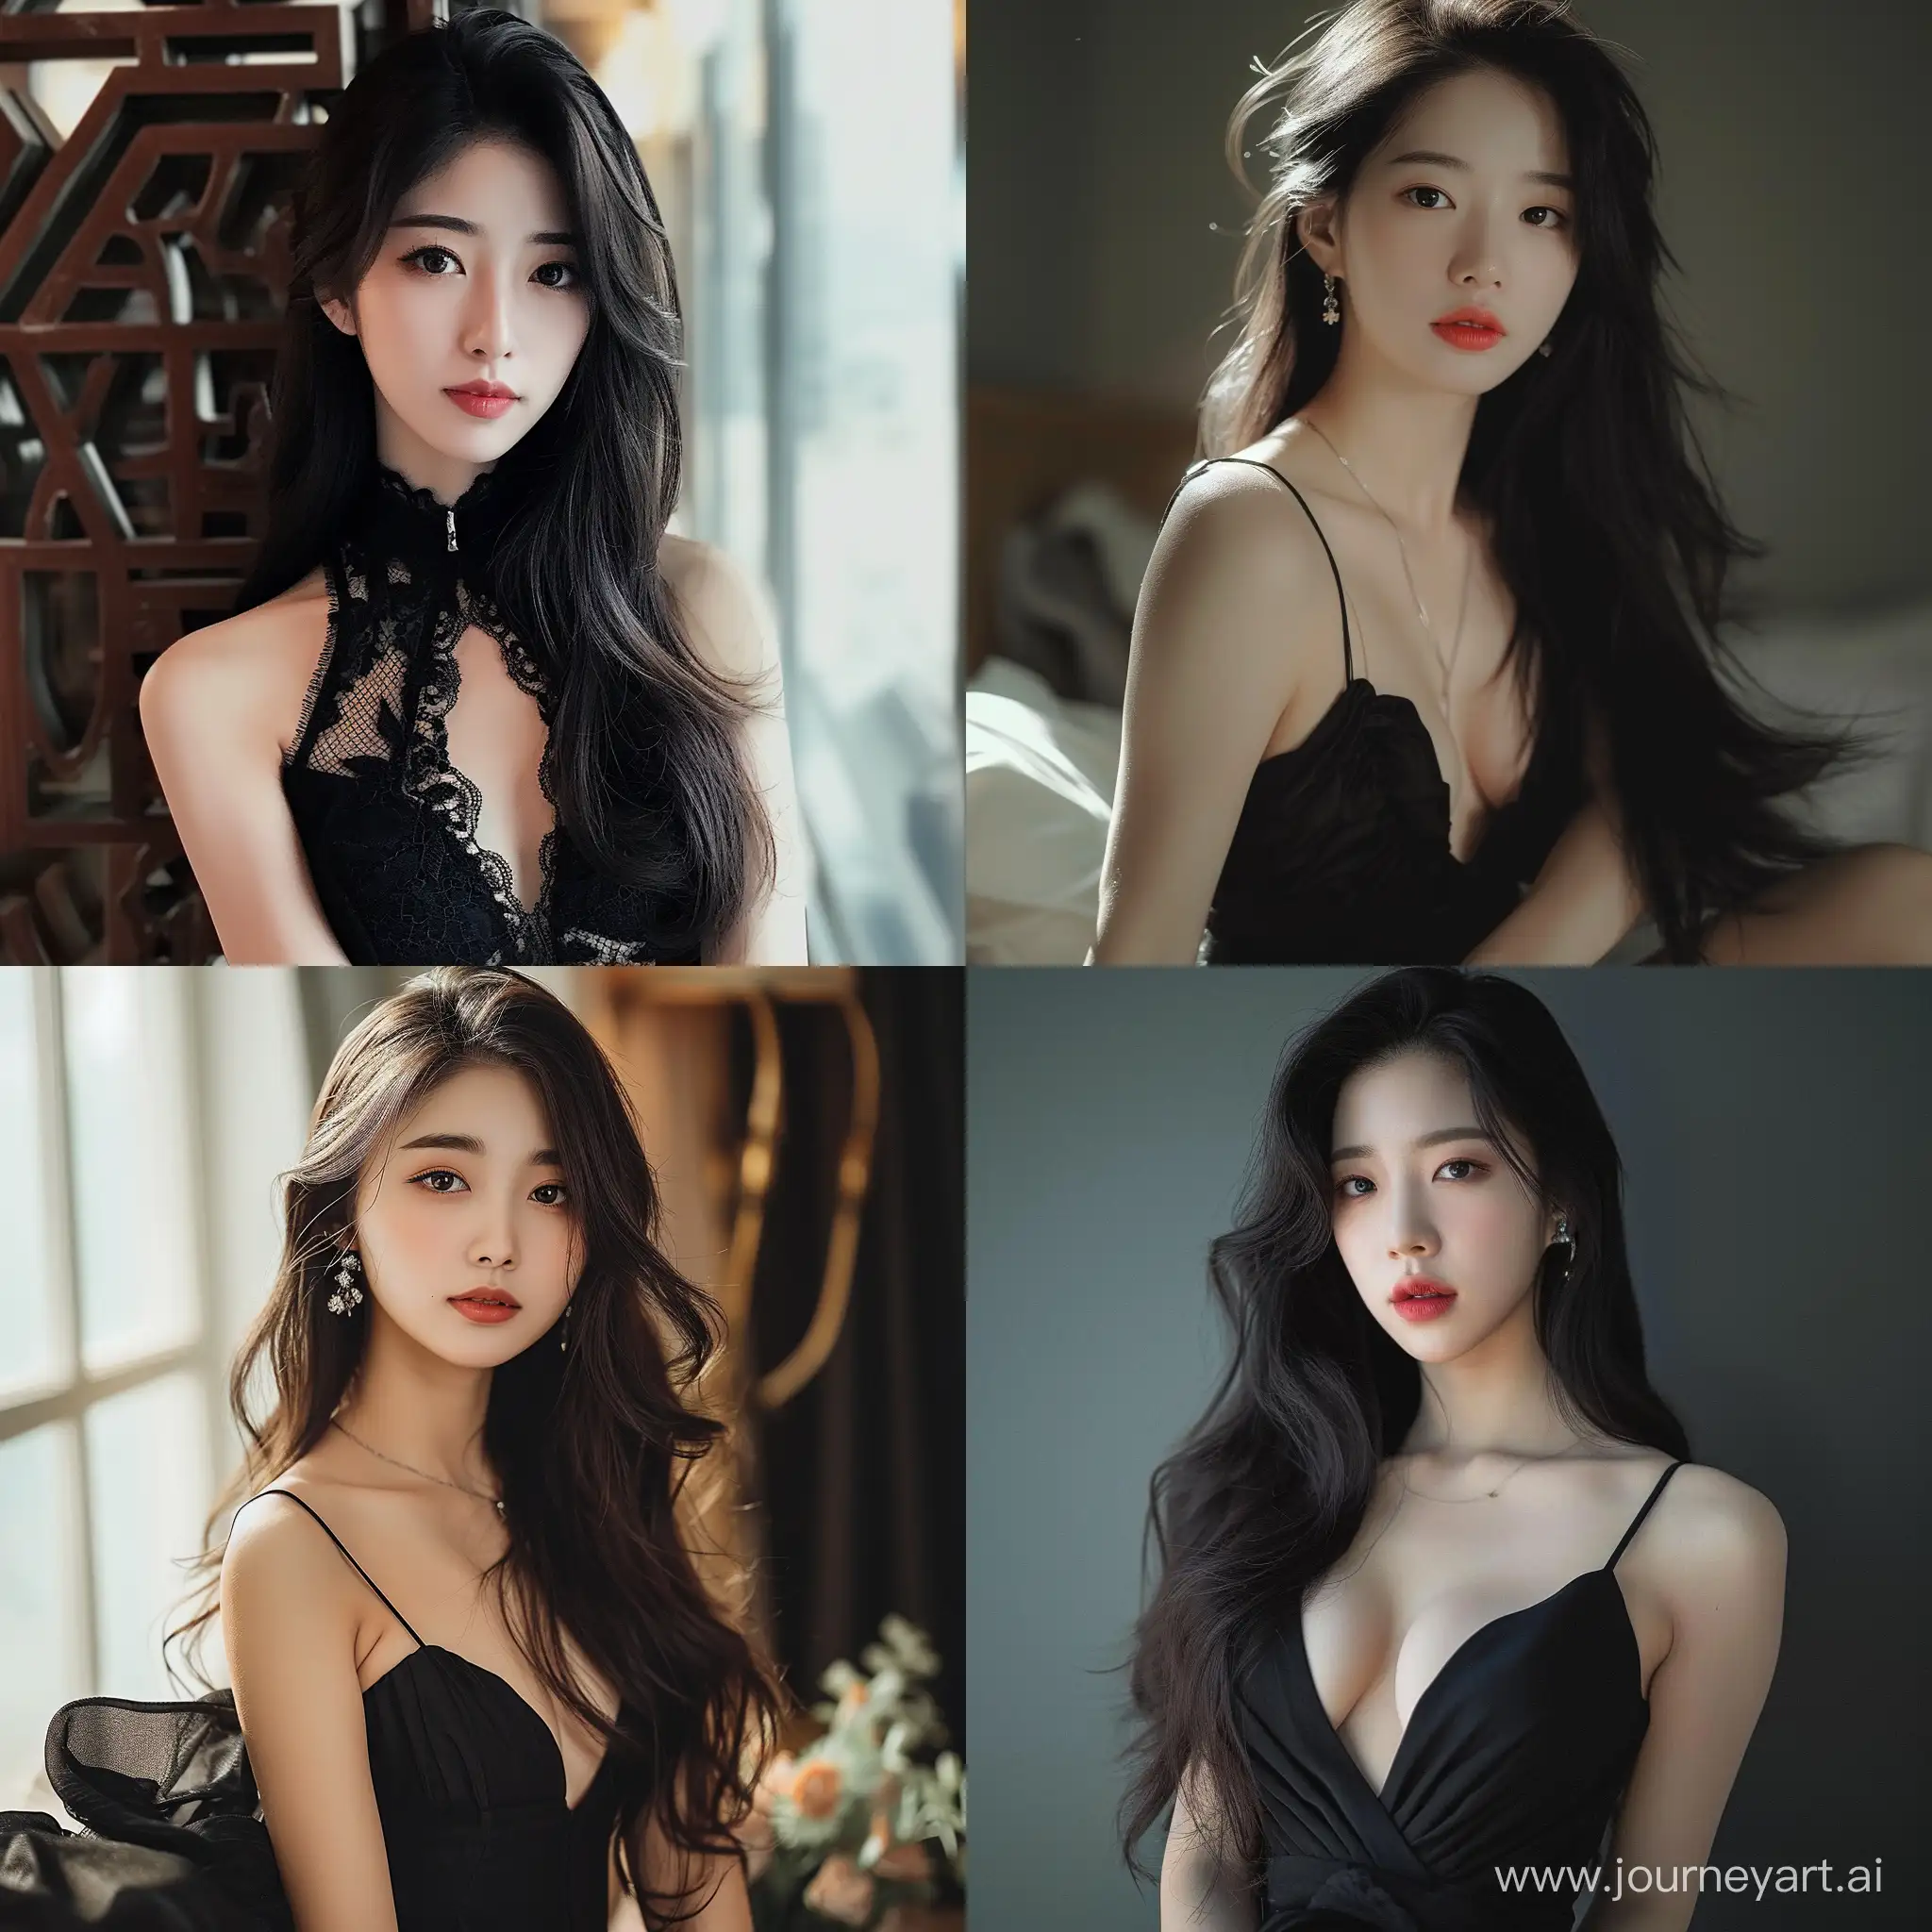 Elegant-Asian-Woman-in-a-Stunning-Black-Dress-with-Long-Hair